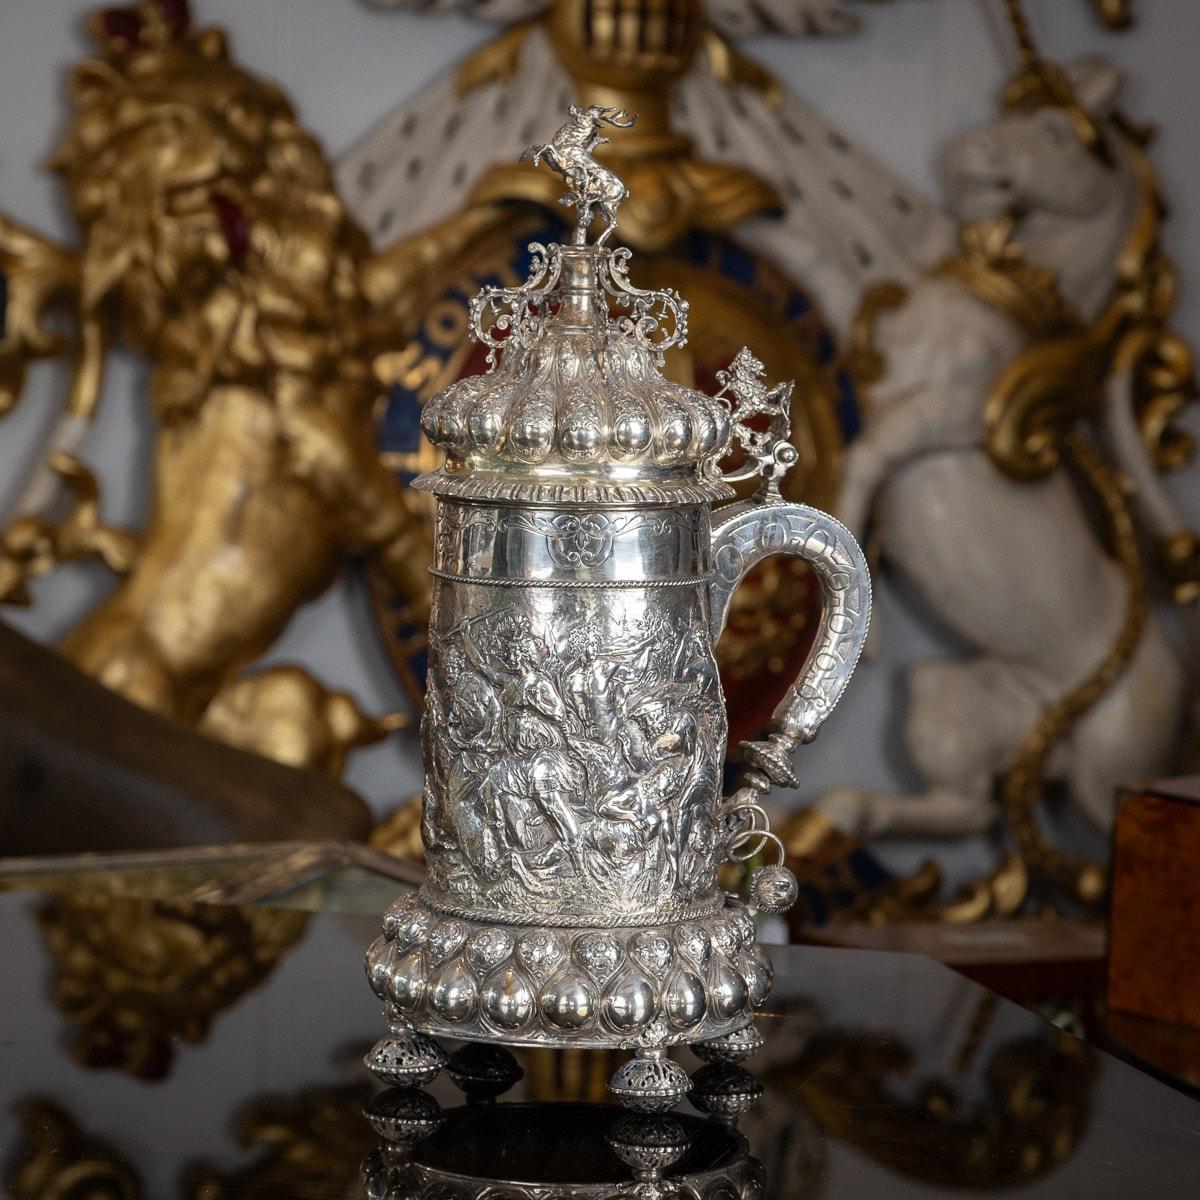 Antique late-19th Century Monumental German solid silver lidded tankard, in the style of the early 17th century examples, beautifully chased and embossed with a very detailed and crowded boar and stag hunting scene, depicting Diana the huntress. The